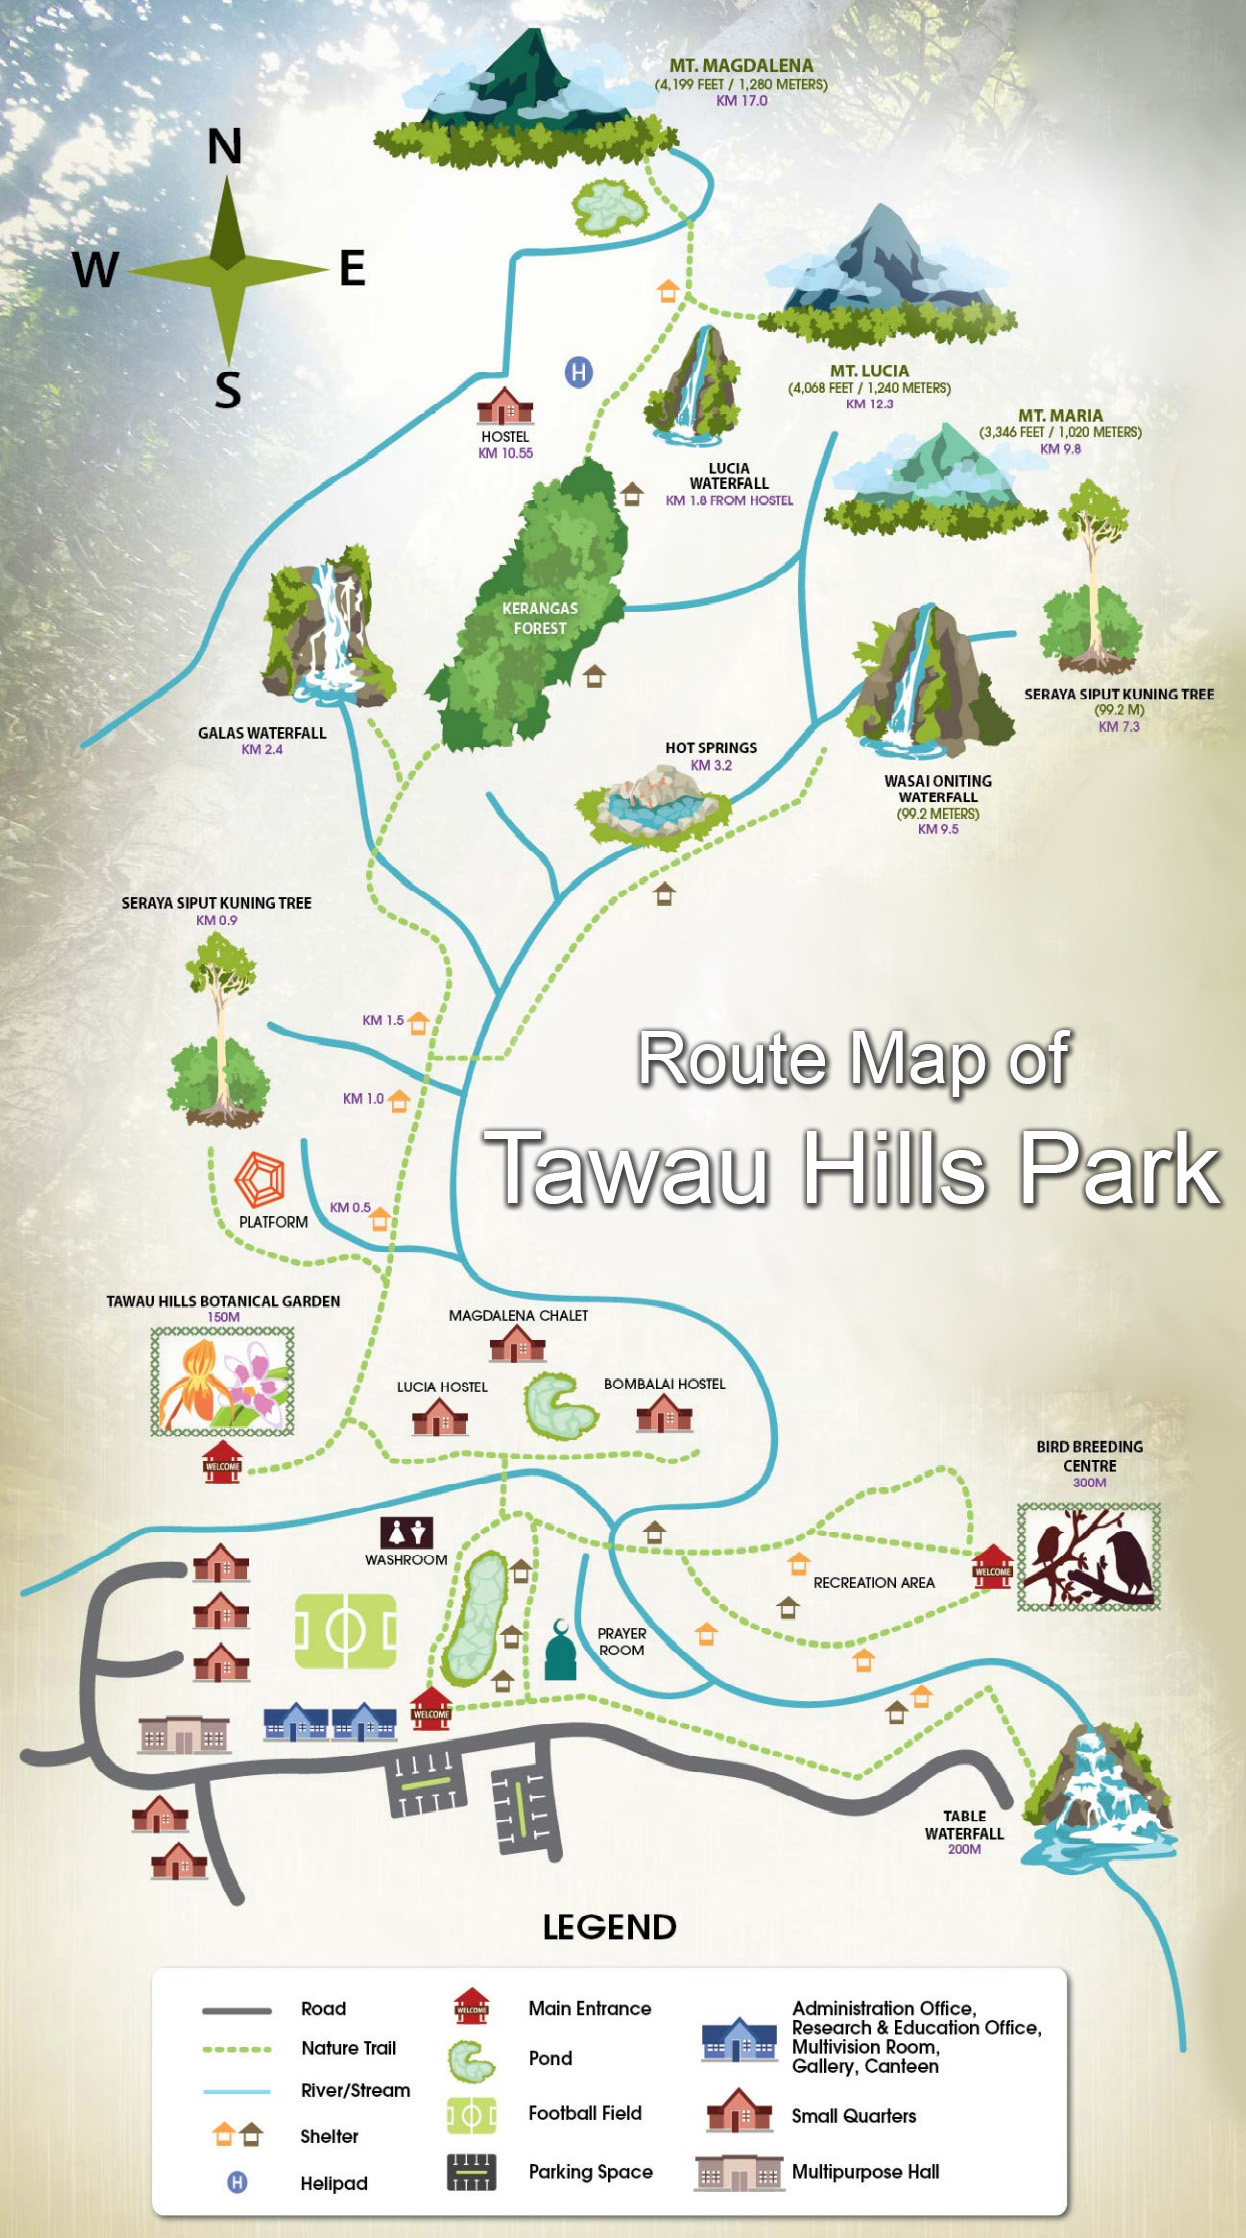 Route Map of Tawau Hills Park